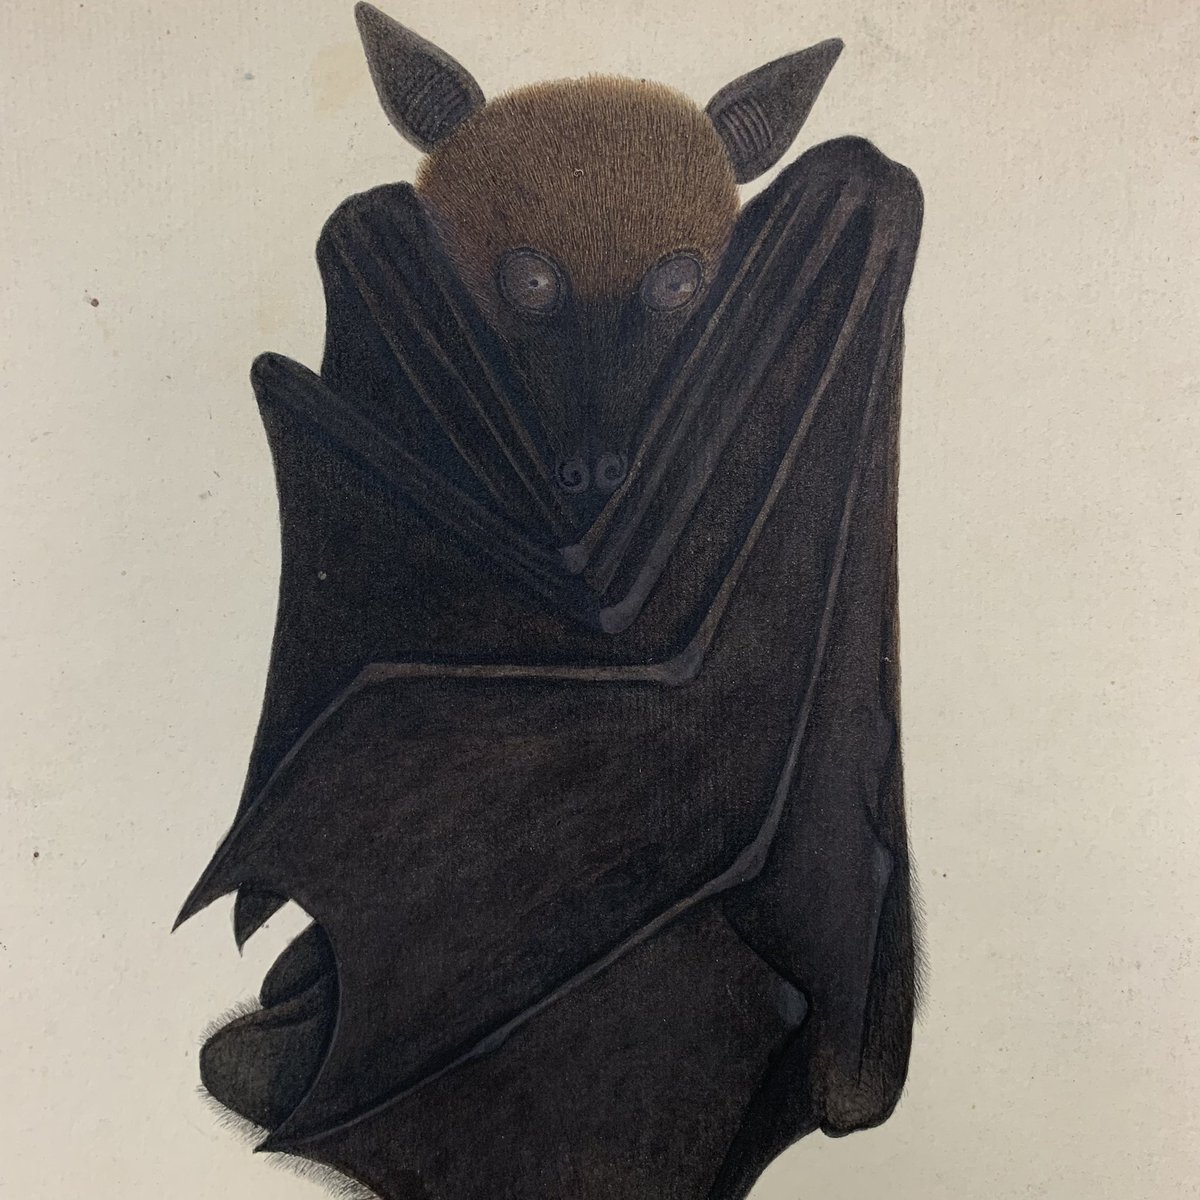 Someone kindly reminded me that it’s #BatAppreciationDay 🦇🦇 Here are some details from two of my favourite watercolour drawings from Bengal collected by Francis Buchanan-Hamilton, c. 1795-1806. British Library NHD3